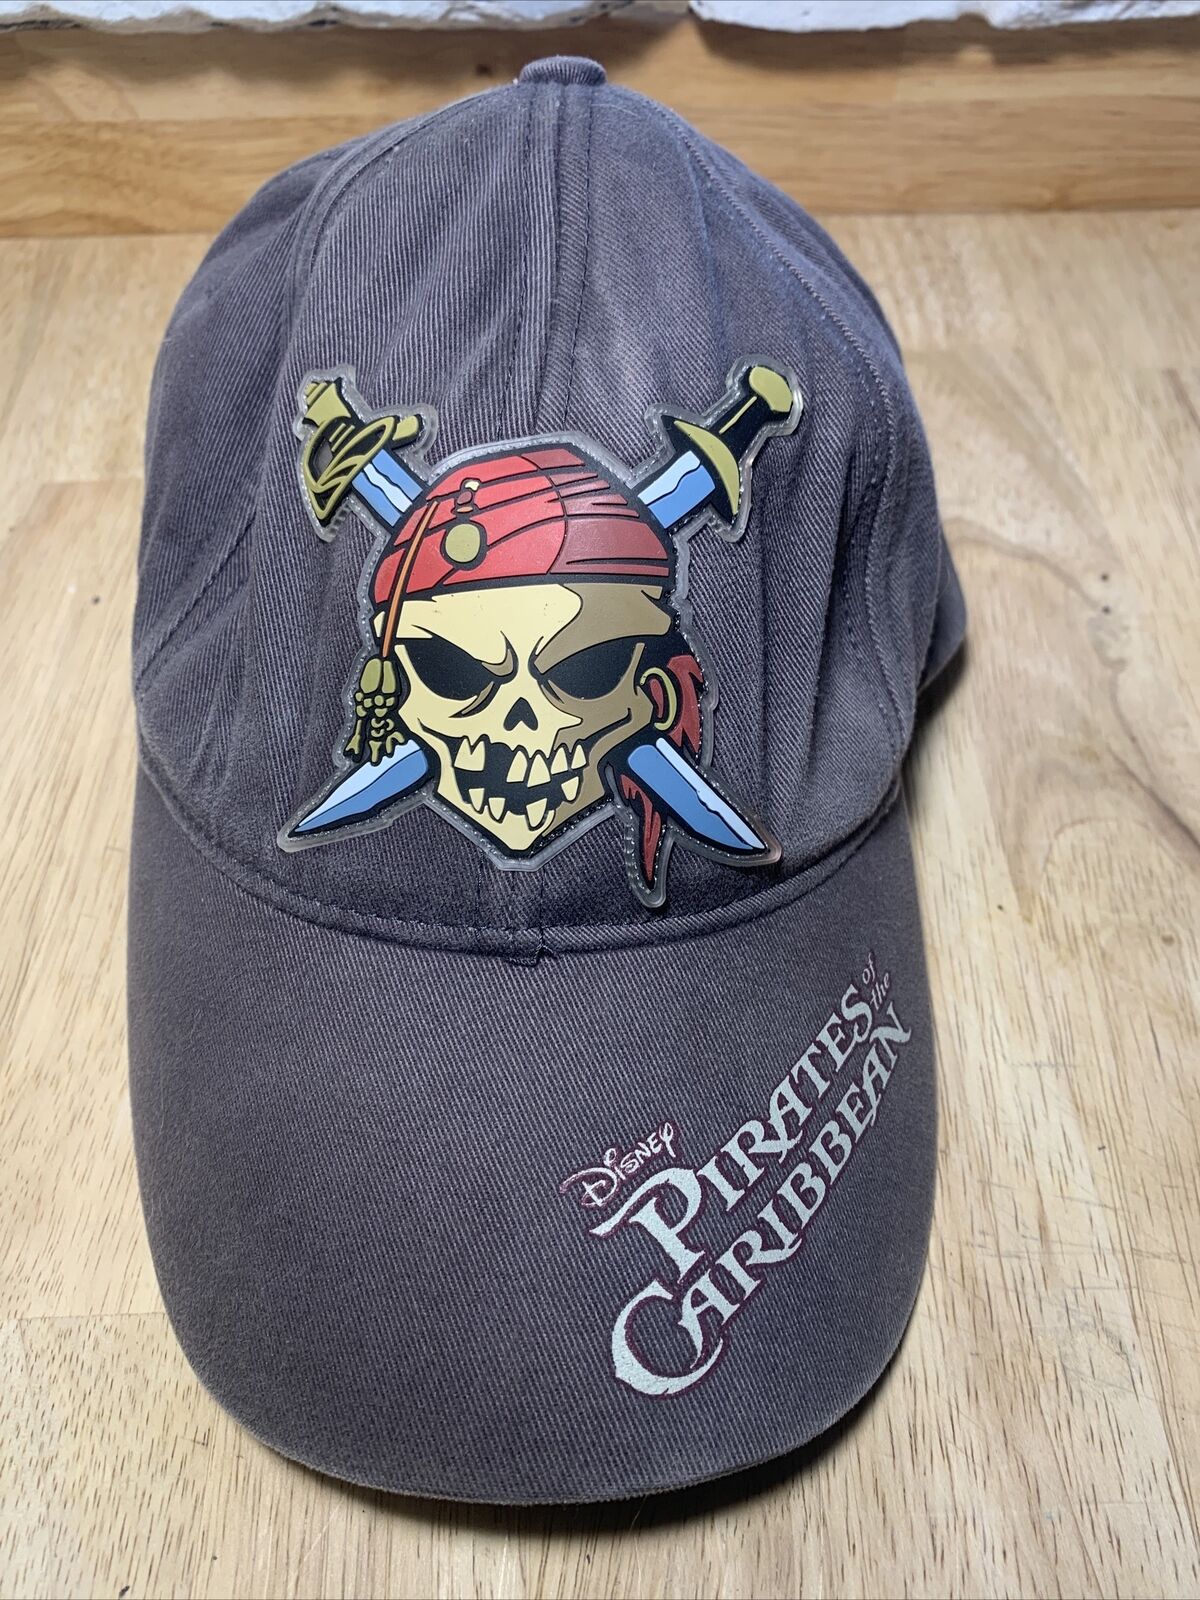 Disney's Pirates of the Caribbean Baseball Cap/Hat Dark Grey One Size Fits Most